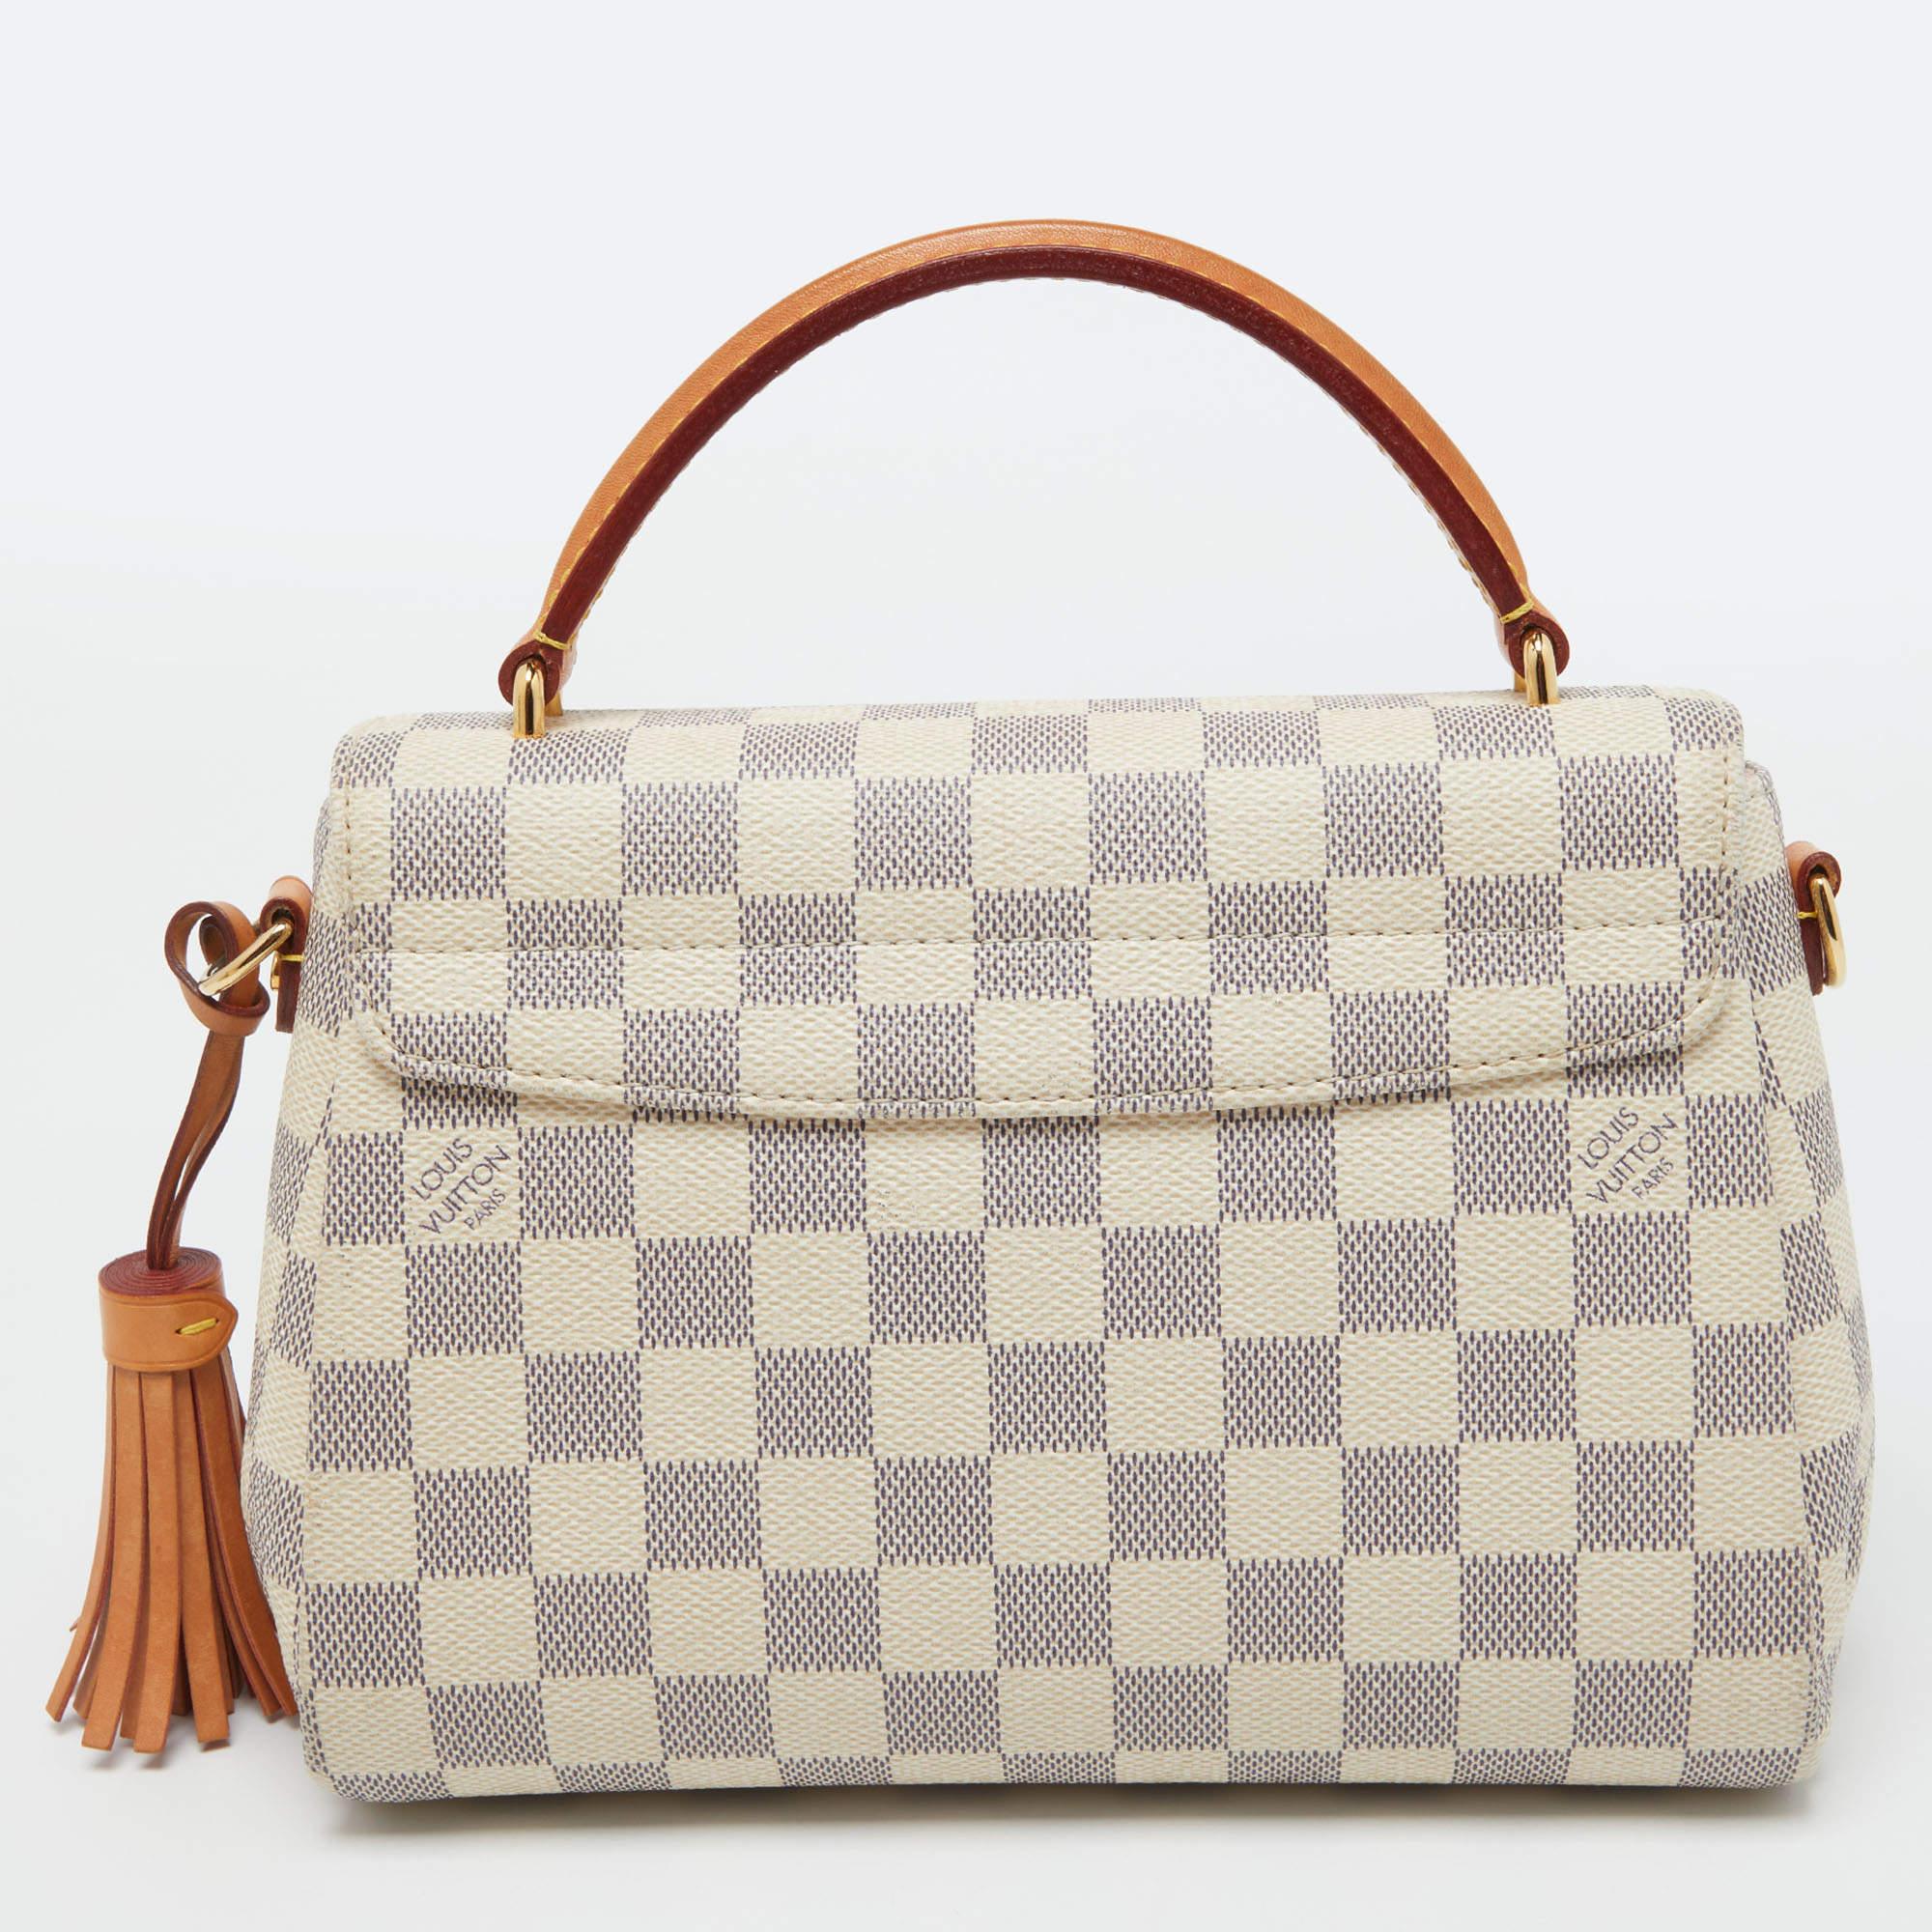 Treat yourself to this Croisette bag by Louis Vuitton. This structured style is crafted from signature Damier Azur canvas. It has a logo-engraved lock in gold-tone hardware, a top handle, and a slender shoulder strap for crossbody wear. The